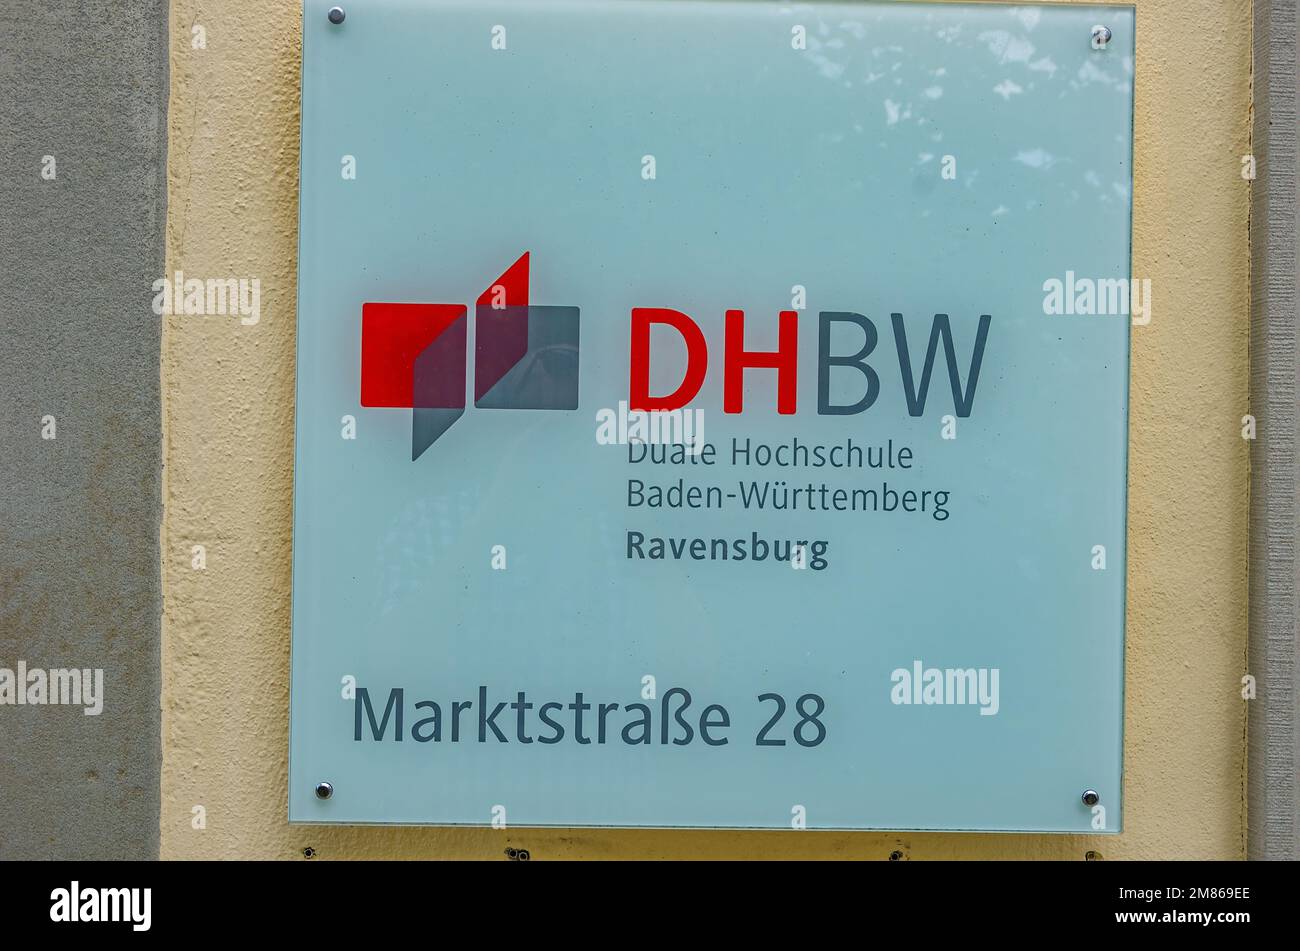 DHBW, Baden-Württemberg Cooperative State University, Ravensburg, Baden-Württemberg, Upper Swabia, Germany. Stock Photo